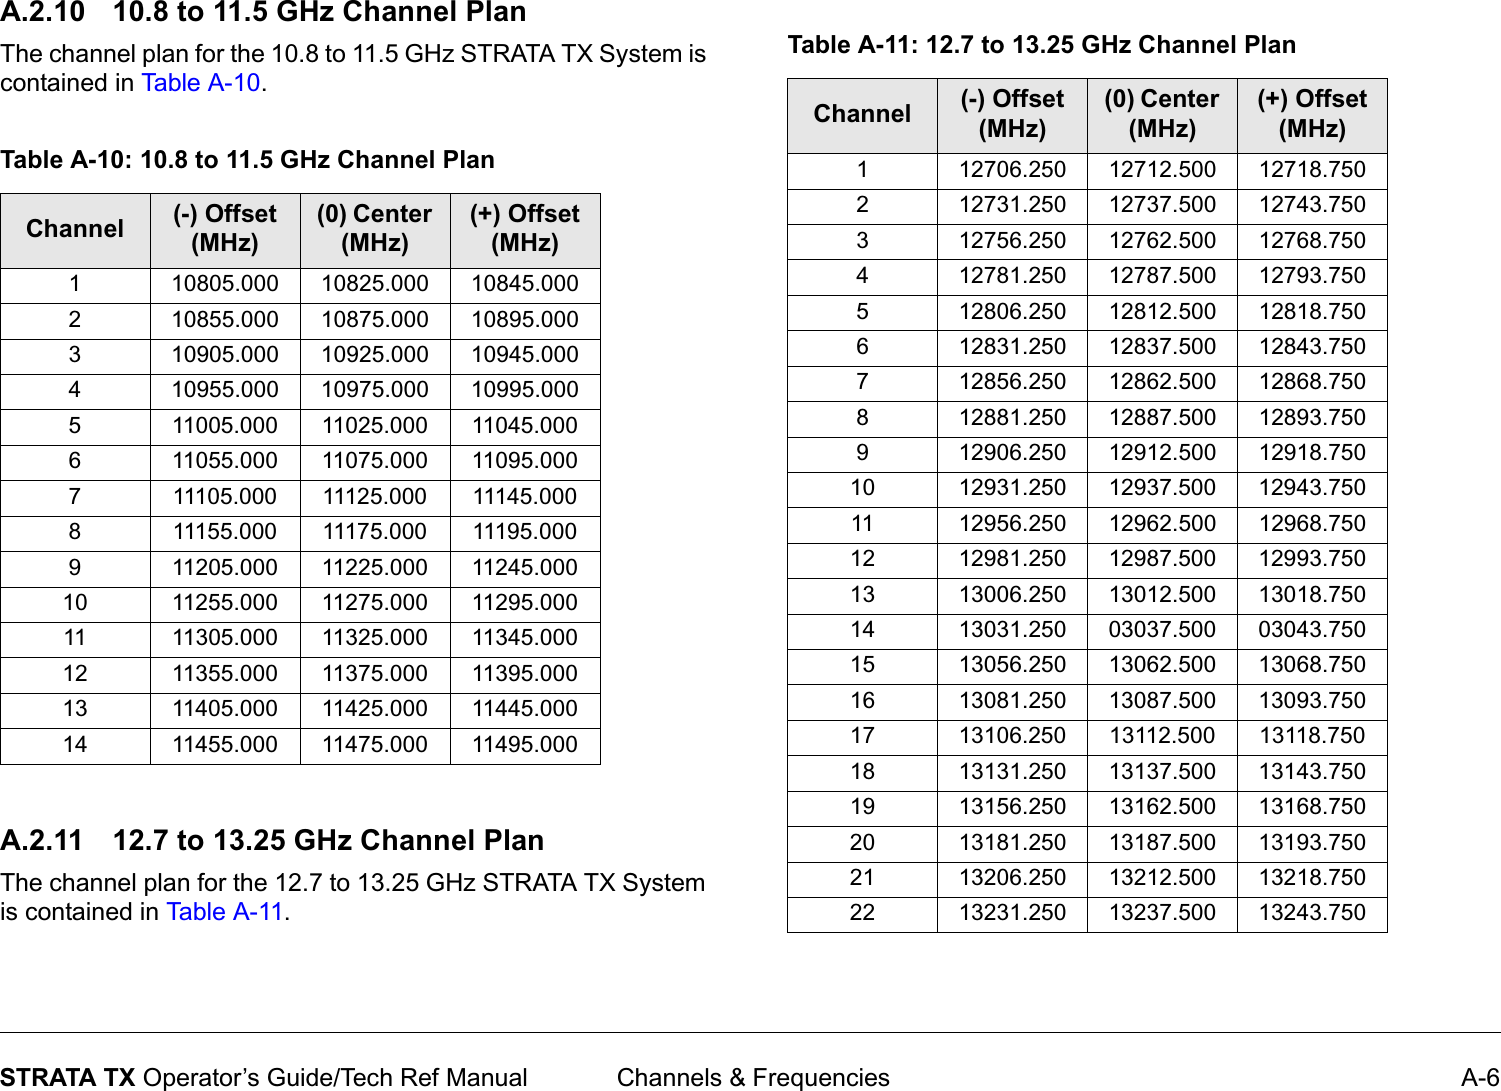  Channels &amp; Frequencies A-6STRATA TX Operator’s Guide/Tech Ref ManualA.2.10 10.8 to 11.5 GHz Channel PlanThe channel plan for the 10.8 to 11.5 GHz STRATA TX System is contained in Table A-10.A.2.11 12.7 to 13.25 GHz Channel PlanThe channel plan for the 12.7 to 13.25 GHz STRATA TX System is contained in Table  A- 11.Table A-10: 10.8 to 11.5 GHz Channel PlanChannel (-) Offset (MHz)(0) Center (MHz)(+) Offset (MHz)1 10805.000 10825.000 10845.0002 10855.000 10875.000 10895.0003 10905.000 10925.000 10945.0004 10955.000 10975.000 10995.0005 11005.000 11025.000 11045.0006 11055.000 11075.000 11095.0007 11105.000 11125.000 11145.0008 11155.000 11175.000 11195.0009 11205.000 11225.000 11245.00010 11255.000 11275.000 11295.00011 11305.000 11325.000 11345.00012 11355.000 11375.000 11395.00013 11405.000 11425.000 11445.00014 11455.000 11475.000 11495.000Table A-11: 12.7 to 13.25 GHz Channel PlanChannel (-) Offset (MHz)(0) Center (MHz)(+) Offset (MHz)1 12706.250 12712.500 12718.7502 12731.250 12737.500 12743.7503 12756.250 12762.500 12768.7504 12781.250 12787.500 12793.7505 12806.250 12812.500 12818.7506 12831.250 12837.500 12843.7507 12856.250 12862.500 12868.7508 12881.250 12887.500 12893.7509 12906.250 12912.500 12918.75010 12931.250 12937.500 12943.75011 12956.250 12962.500 12968.75012 12981.250 12987.500 12993.75013 13006.250 13012.500 13018.75014 13031.250 03037.500 03043.75015 13056.250 13062.500 13068.75016 13081.250 13087.500 13093.75017 13106.250 13112.500 13118.75018 13131.250 13137.500 13143.75019 13156.250 13162.500 13168.75020 13181.250 13187.500 13193.75021 13206.250 13212.500 13218.75022 13231.250 13237.500 13243.750